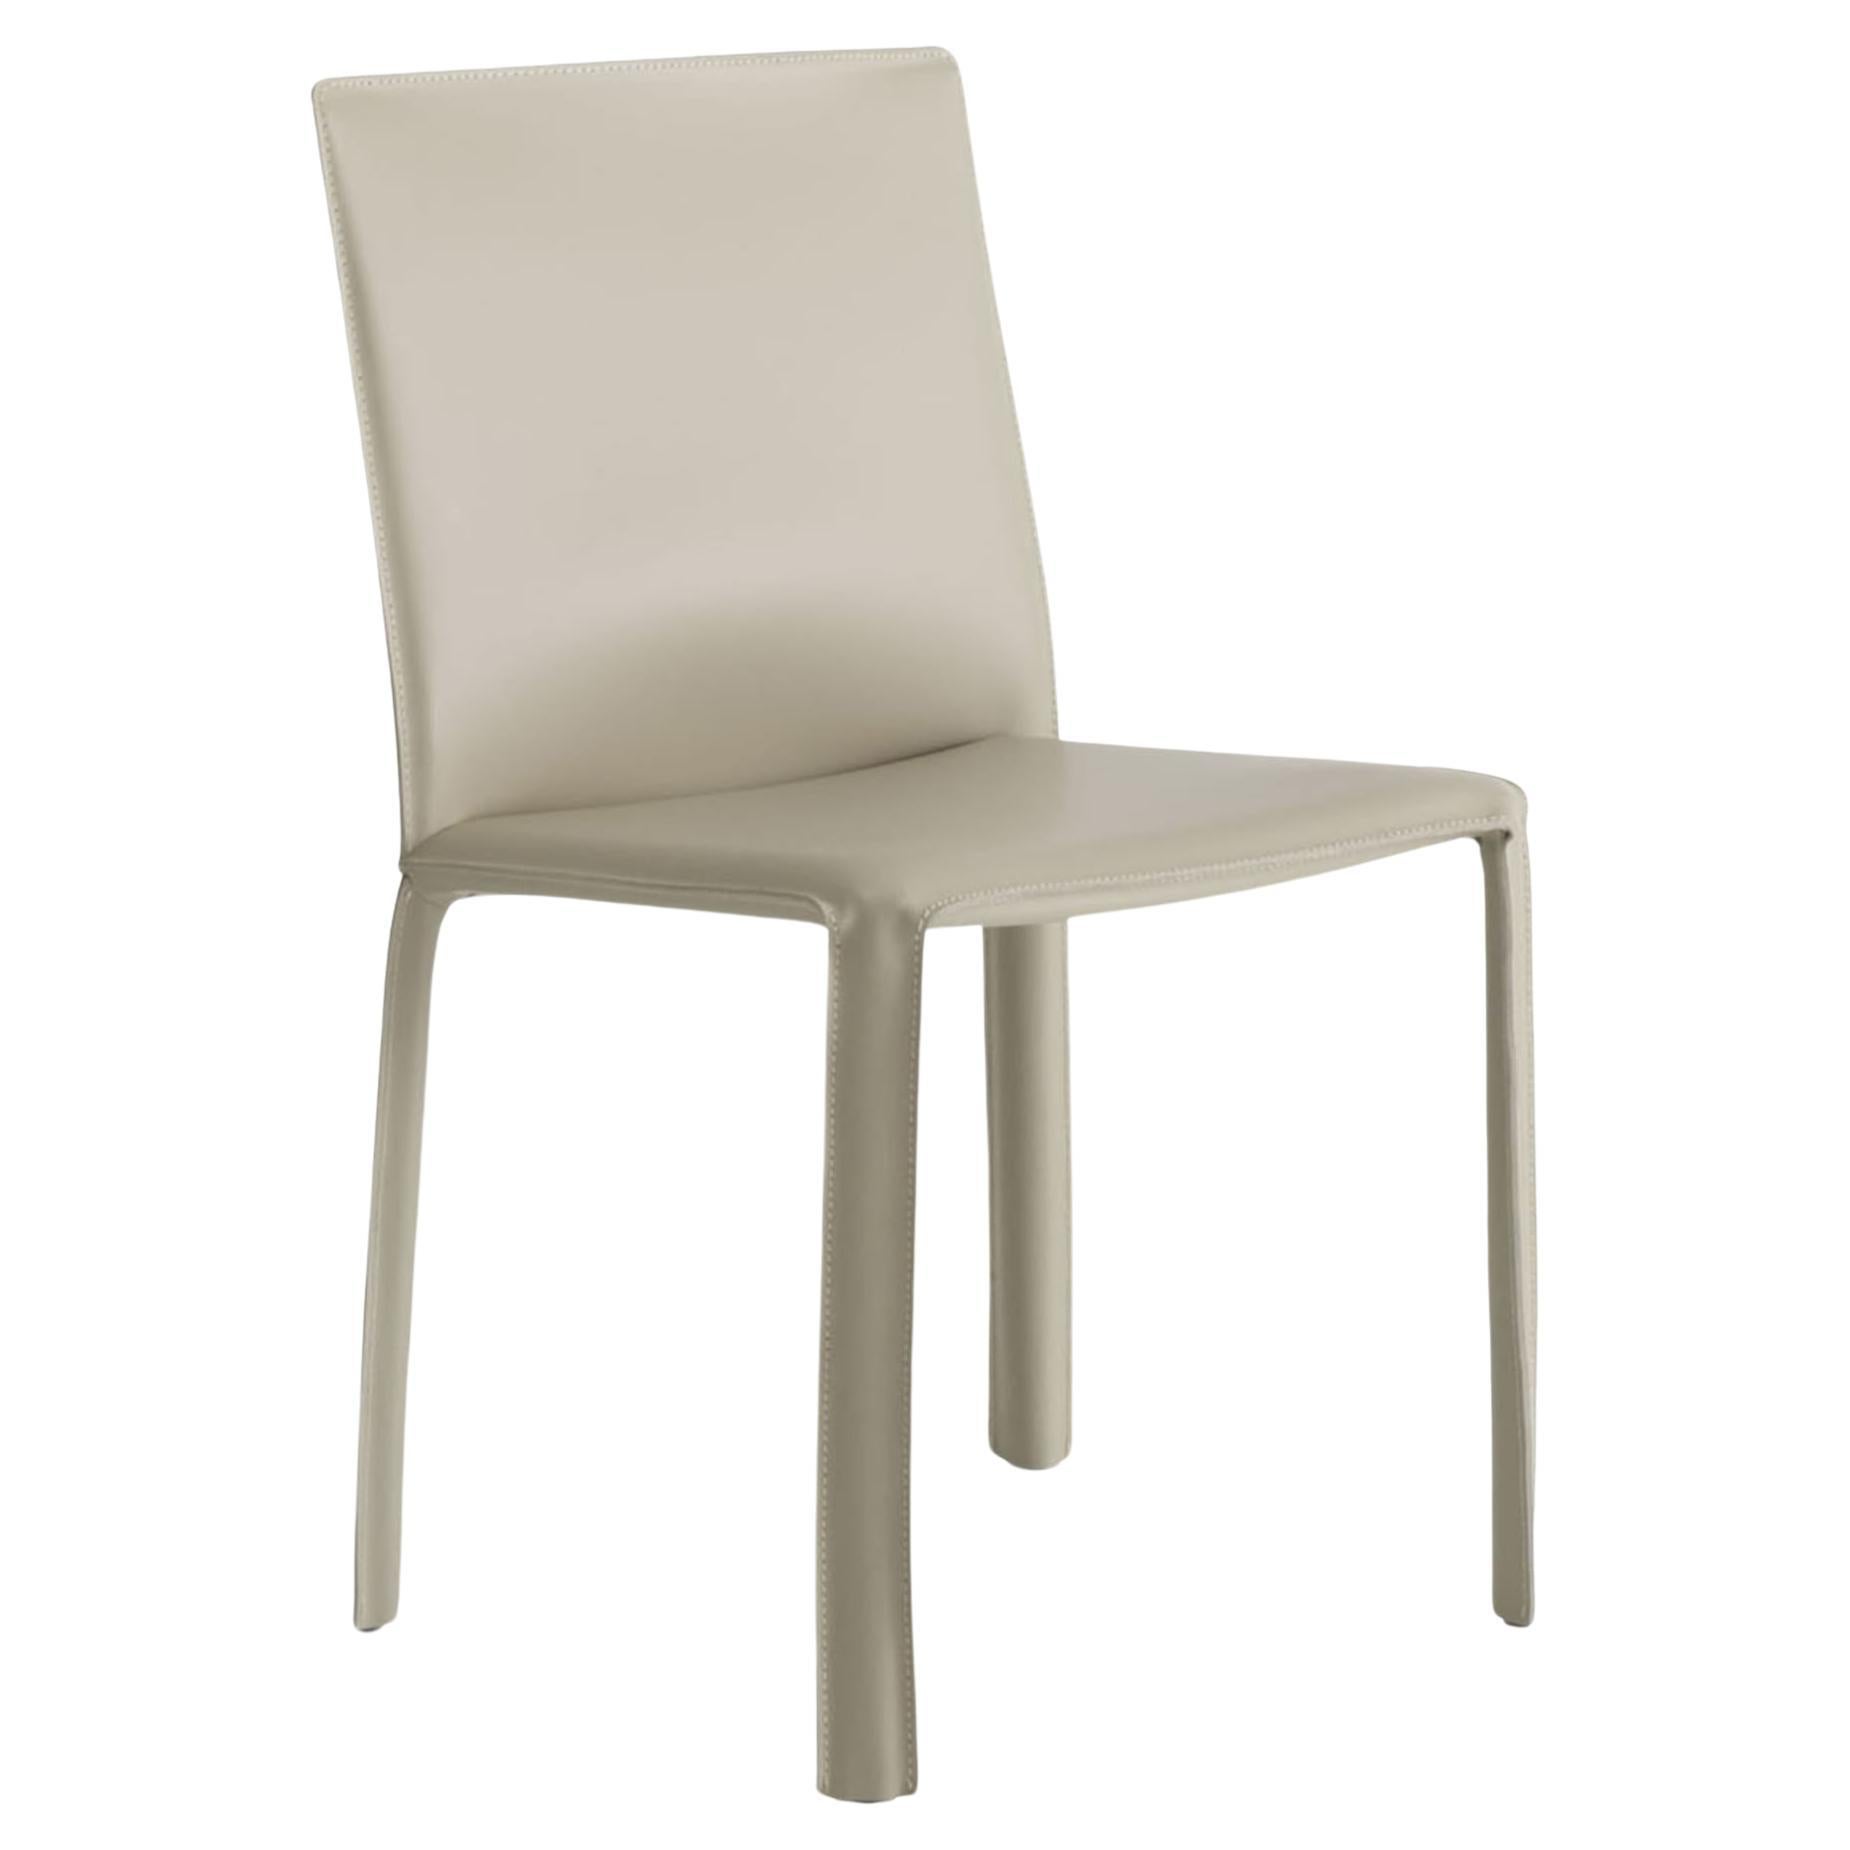 Jumpsuite Beige Leather Chair For Sale